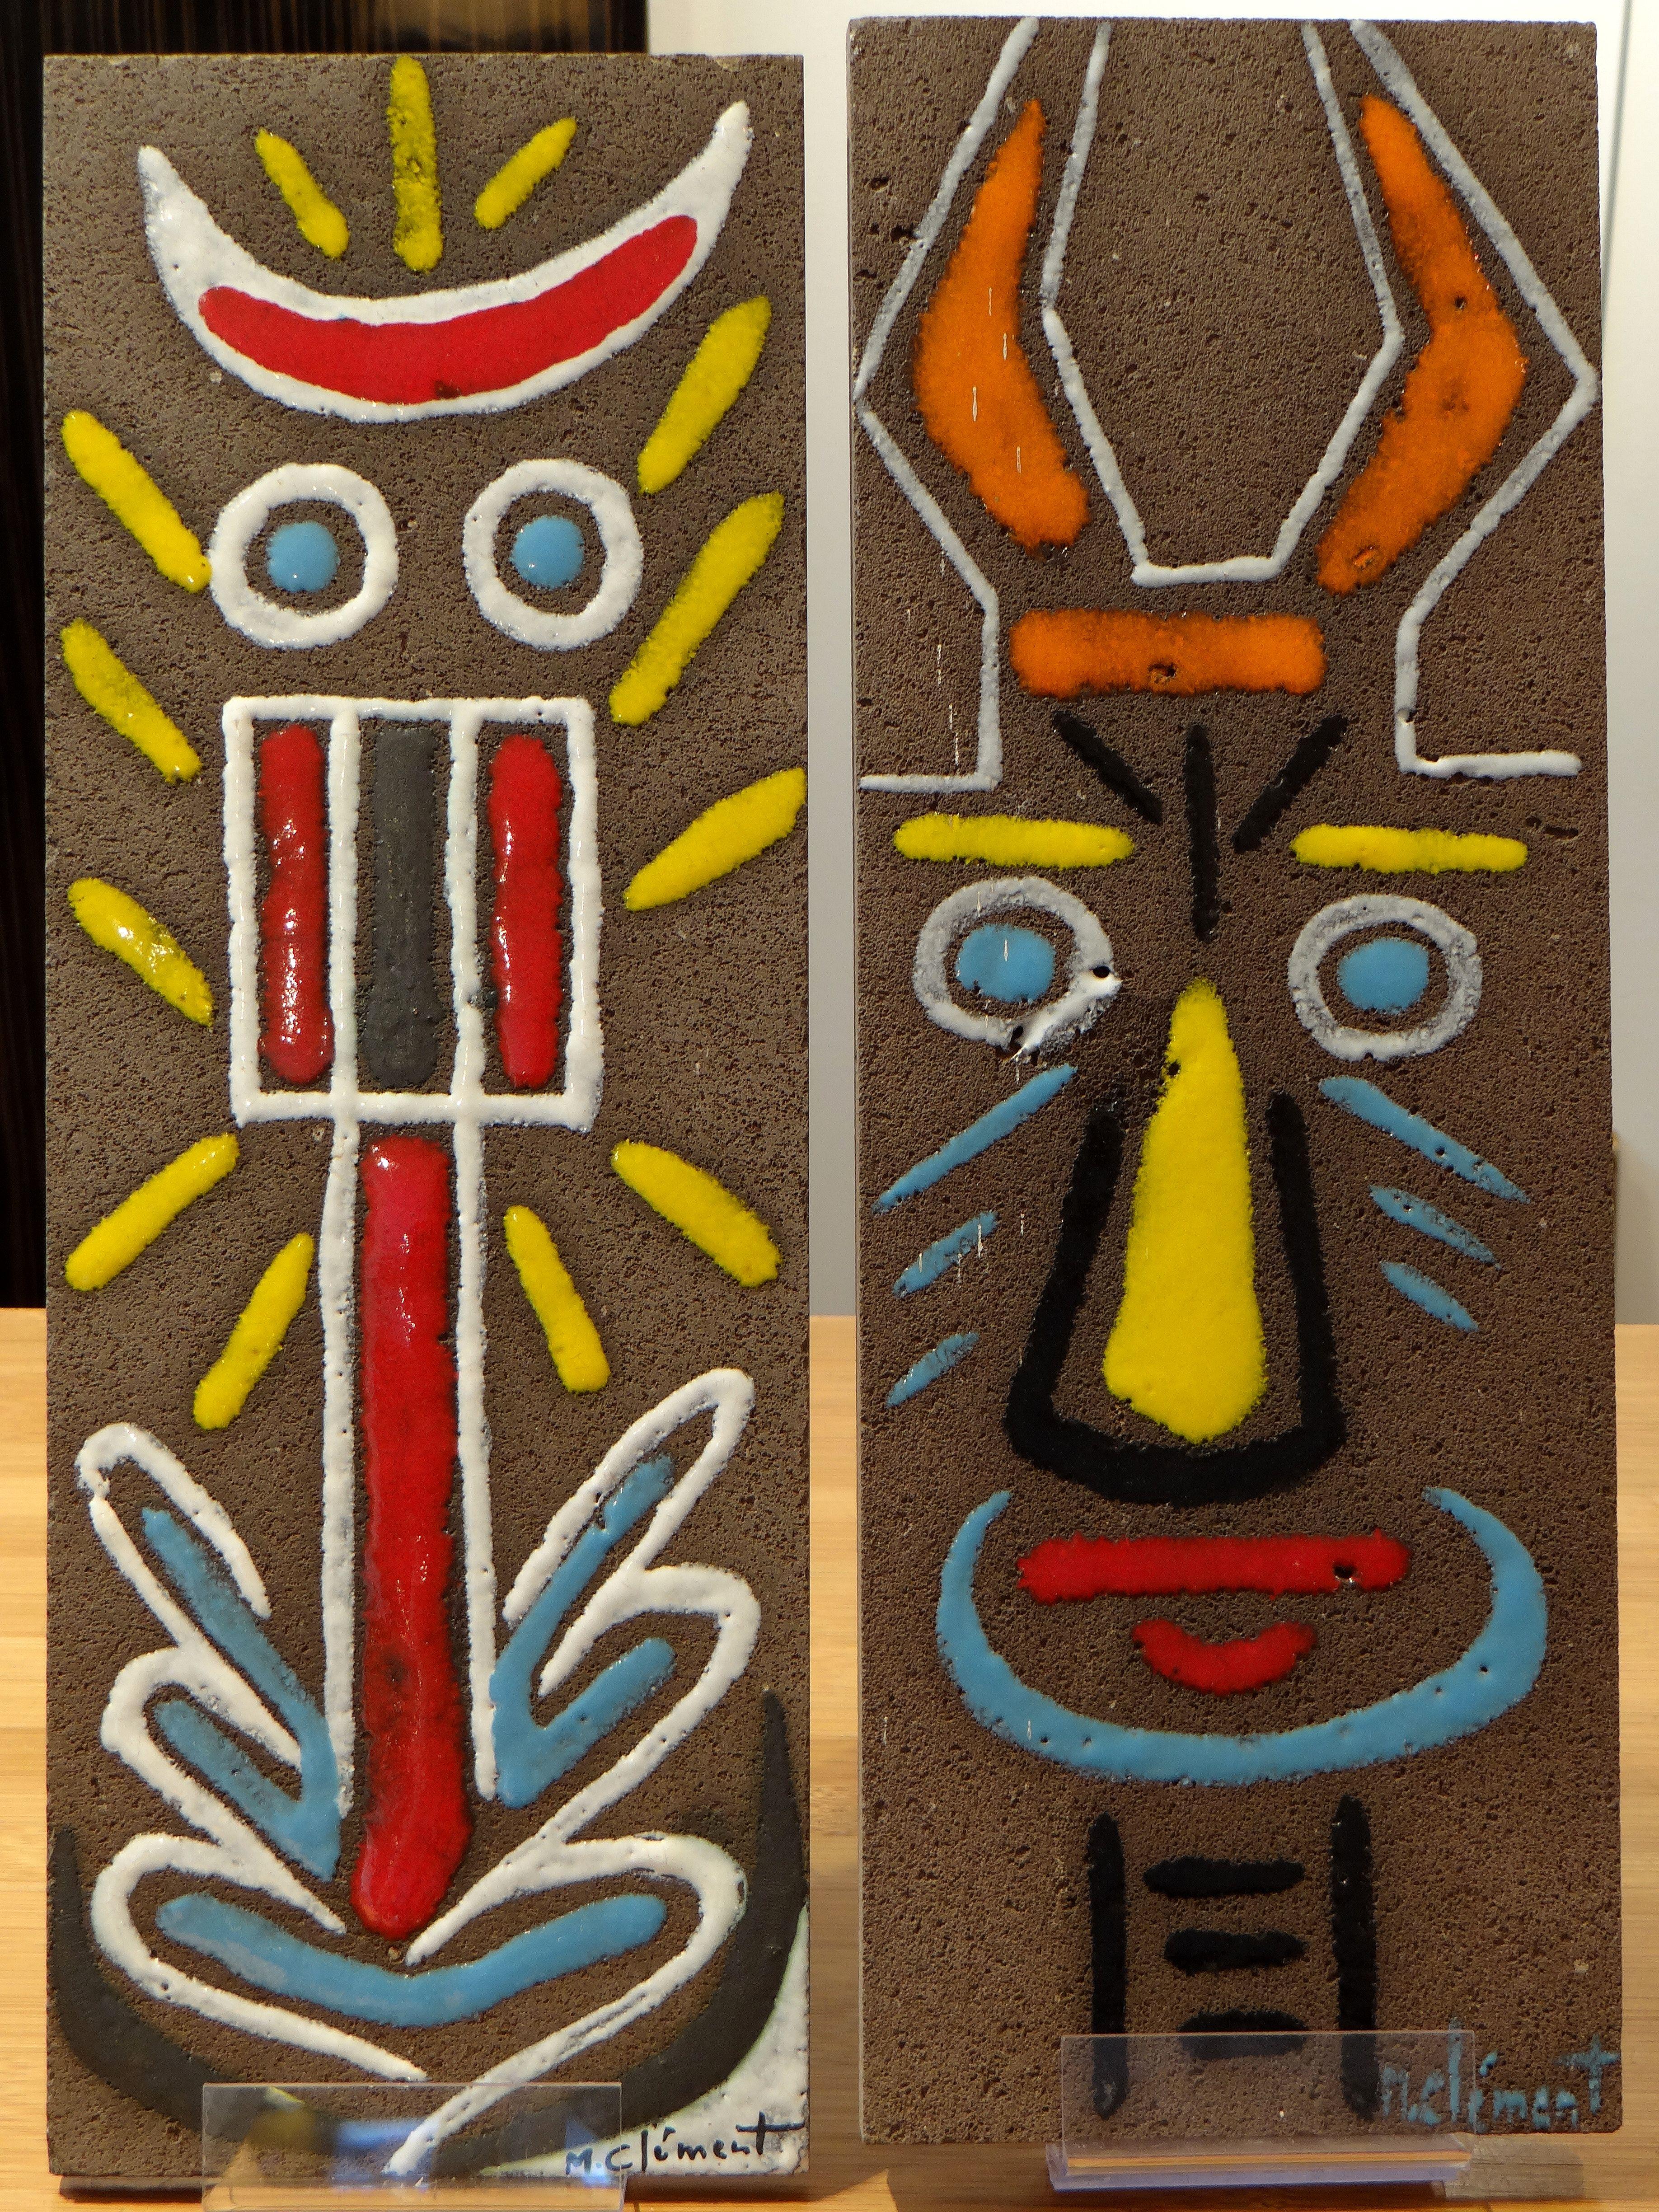 Very nice pair of enamelled ceramic panels (lava) 1950s-1960s appearing a very colorful character. Creation of Michel Clément, ceramist in the former commune of Croix-de-Vie, now Saint-Gilles Croix de Vie since 1967.
The decor, by its style and its